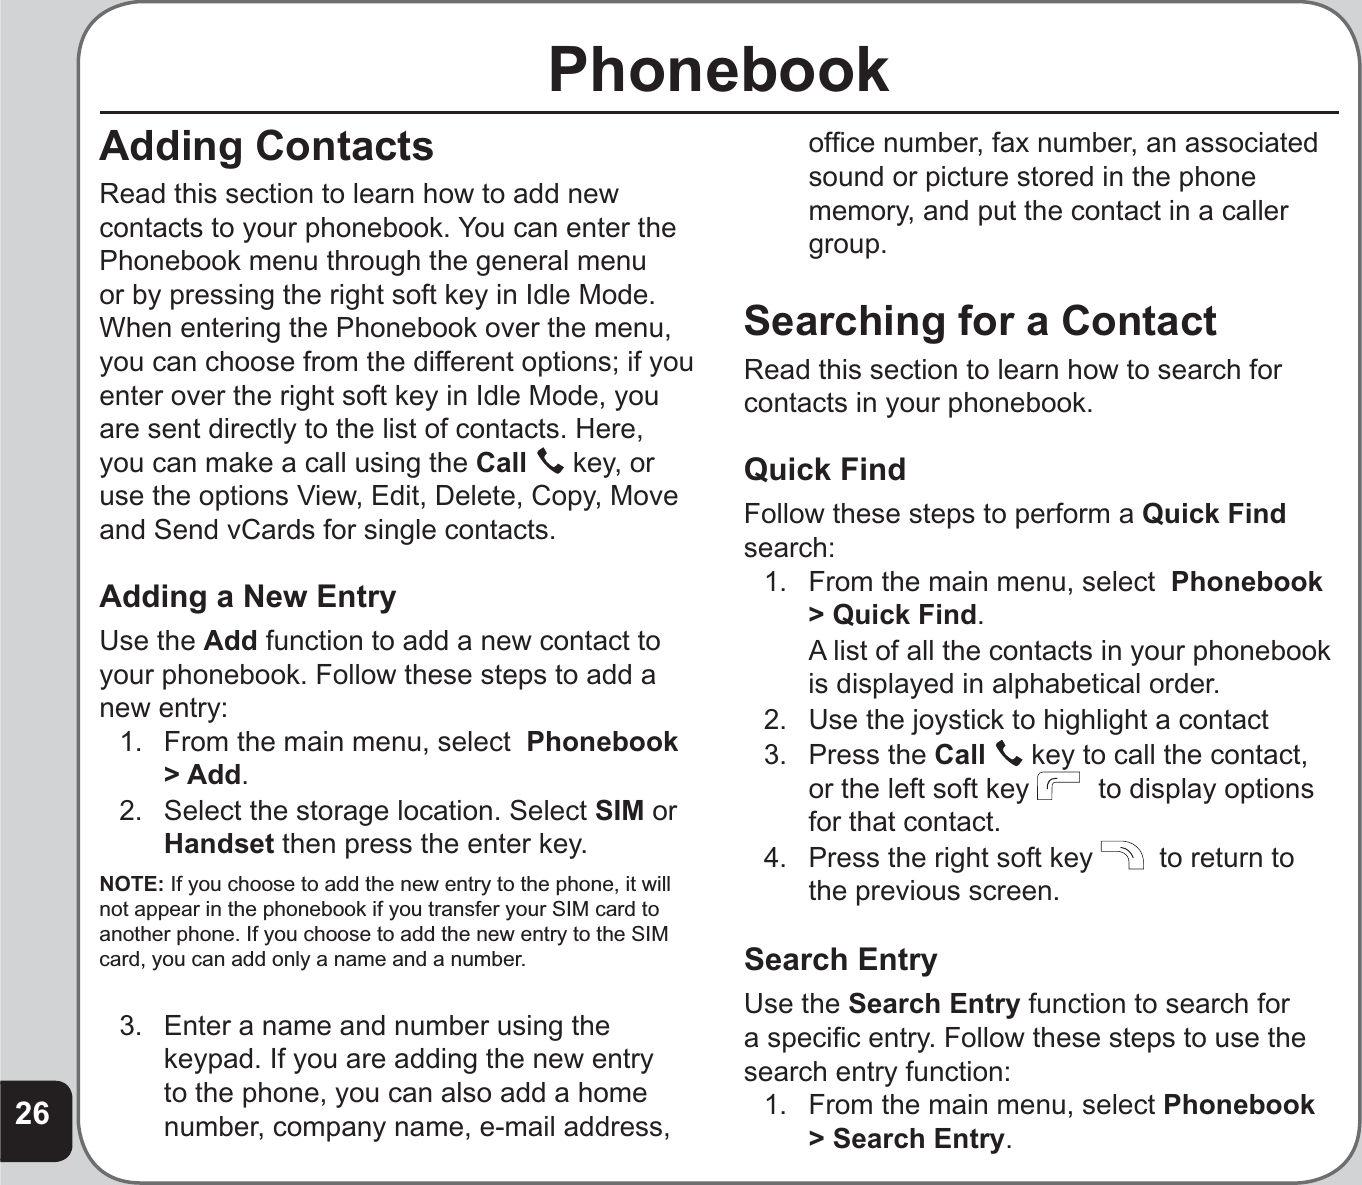 26PhonebookAdding ContactsRead this section to learn how to add new contacts to your phonebook. You can enter the Phonebook menu through the general menu or by pressing the right soft key in Idle Mode. When entering the Phonebook over the menu, you can choose from the different options; if you enter over the right soft key in Idle Mode, you are sent directly to the list of contacts. Here, you can make a call using the Call  key, or use the options View, Edit, Delete, Copy, Move and Send vCards for single contacts. Adding a New EntryUse the Add function to add a new contact to your phonebook. Follow these steps to add a new entry:1.  From the main menu, select  Phonebook&gt; Add.2.  Select the storage location. Select SIM or Handset then press the enter key. NOTE: If you choose to add the new entry to the phone, it will not appear in the phonebook if you transfer your SIM card to another phone. If you choose to add the new entry to the SIM card, you can add only a name and a number.3.  Enter a name and number using the  keypad. If you are adding the new entry to the phone, you can also add a home number, company name, e-mail address, ofﬁ ce number, fax number, an associated sound or picture stored in the phone memory, and put the contact in a caller group.Searching for a ContactRead this section to learn how to search for contacts in your phonebook.Quick FindFollow these steps to perform a Quick Find search:1.  From the main menu, select  Phonebook&gt; Quick Find.  A list of all the contacts in your phonebook is displayed in alphabetical order.2.  Use the joystick to highlight a contact3. Press the Call  key to call the contact, or the left soft key    to display options for that contact.4.  Press the right soft key    to return to the previous screen.Search EntryUse the Search Entry function to search for a speciﬁ c entry. Follow these steps to use the search entry function:1.  From the main menu, select Phonebook&gt; Search Entry.